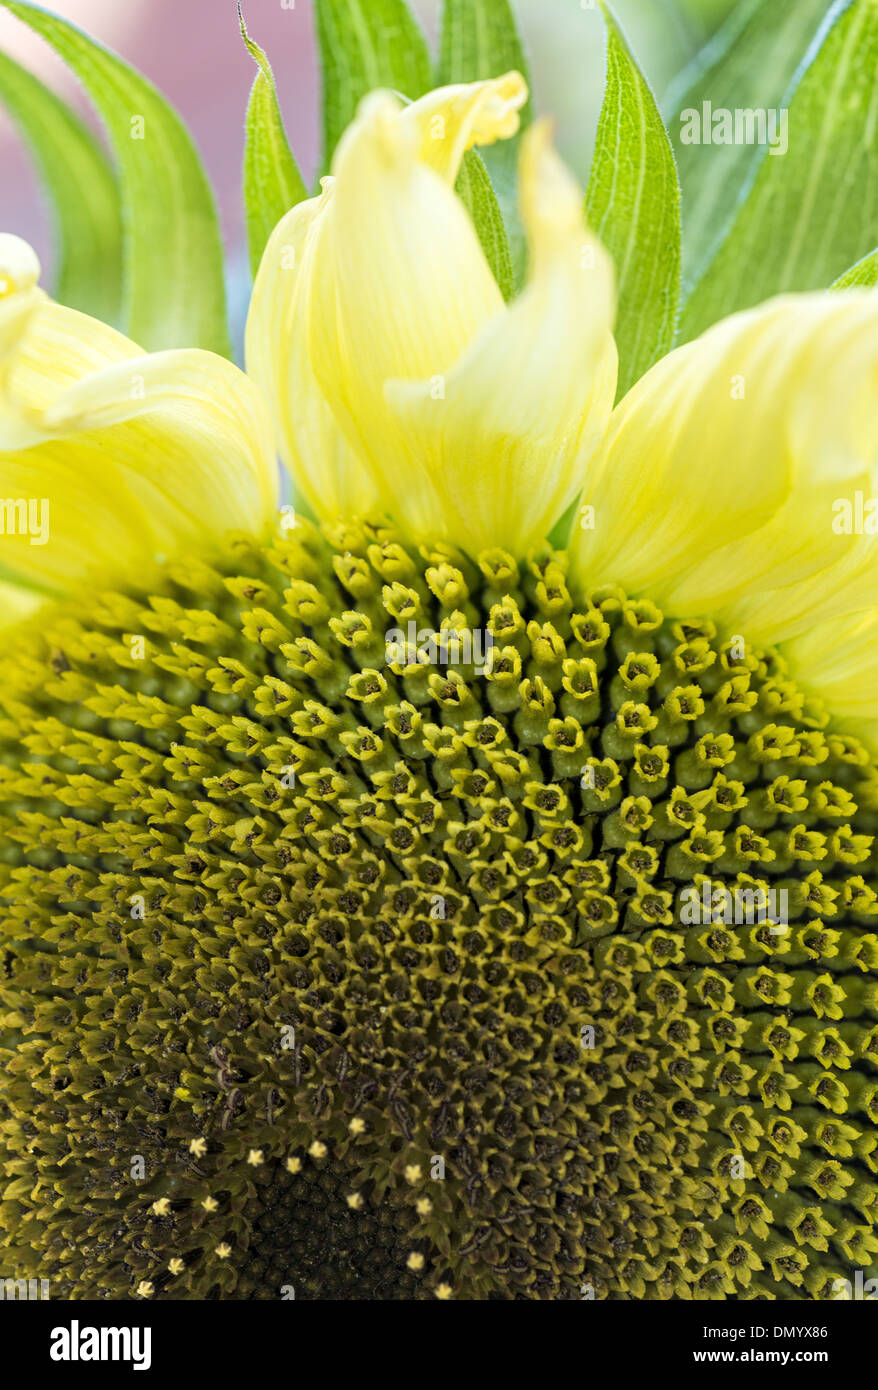 Disk floret detail of large yellow sunflower - Helianthus annuus Stock Photo